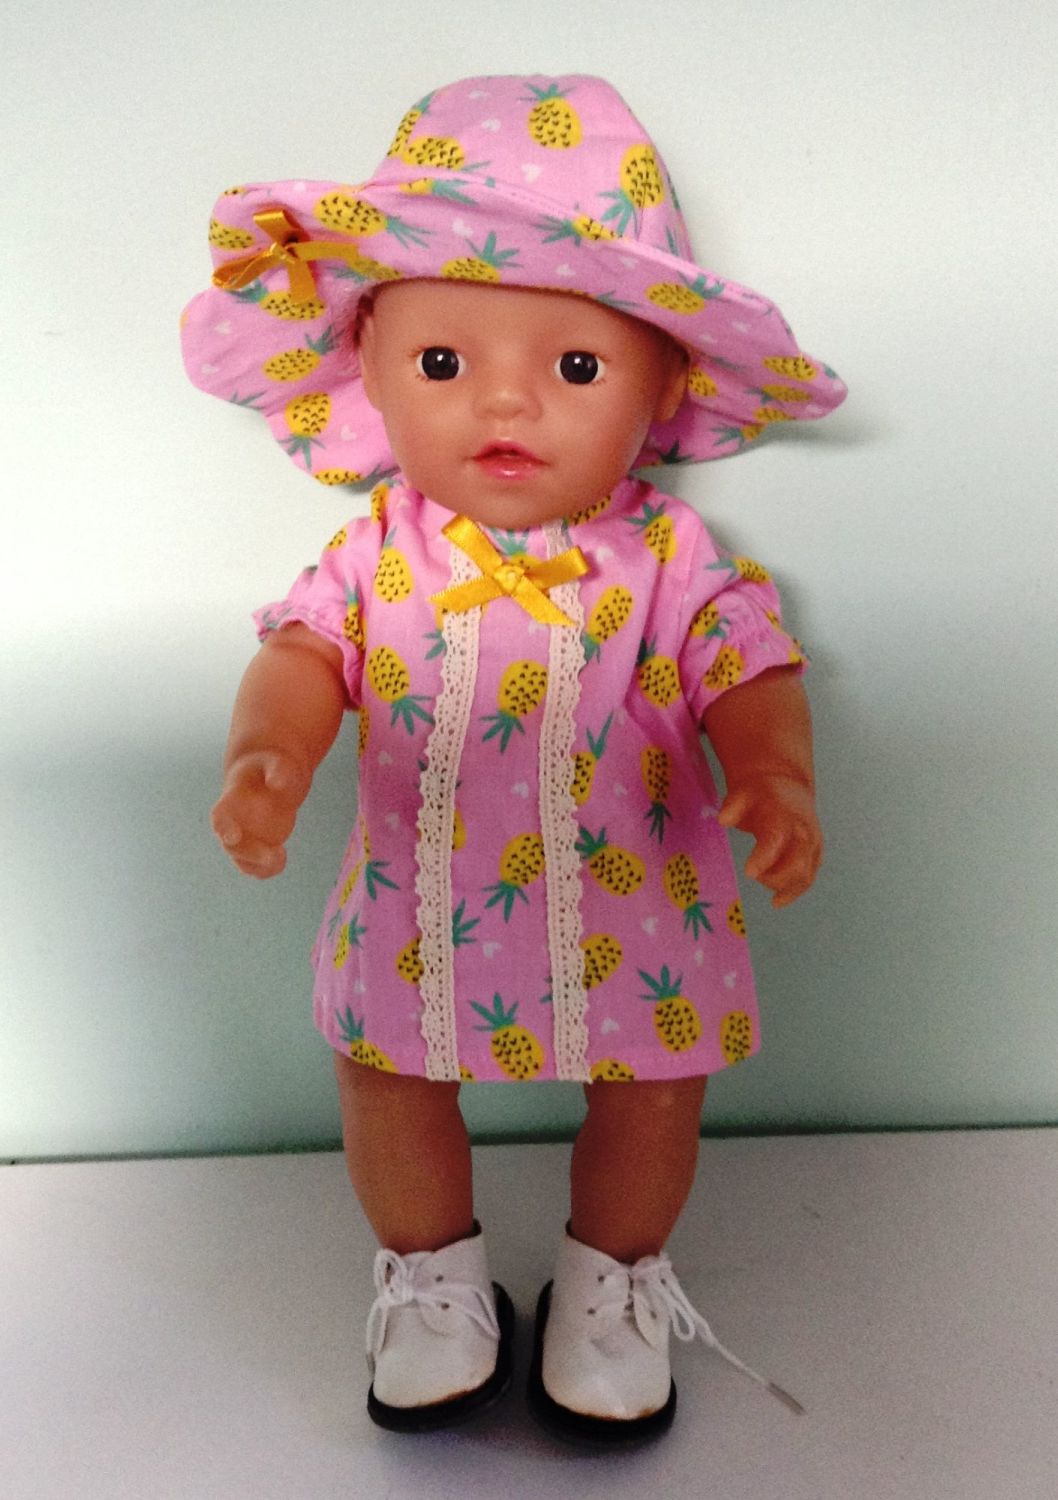 Doll's dress and sunhat to fit 12 inch high baby doll